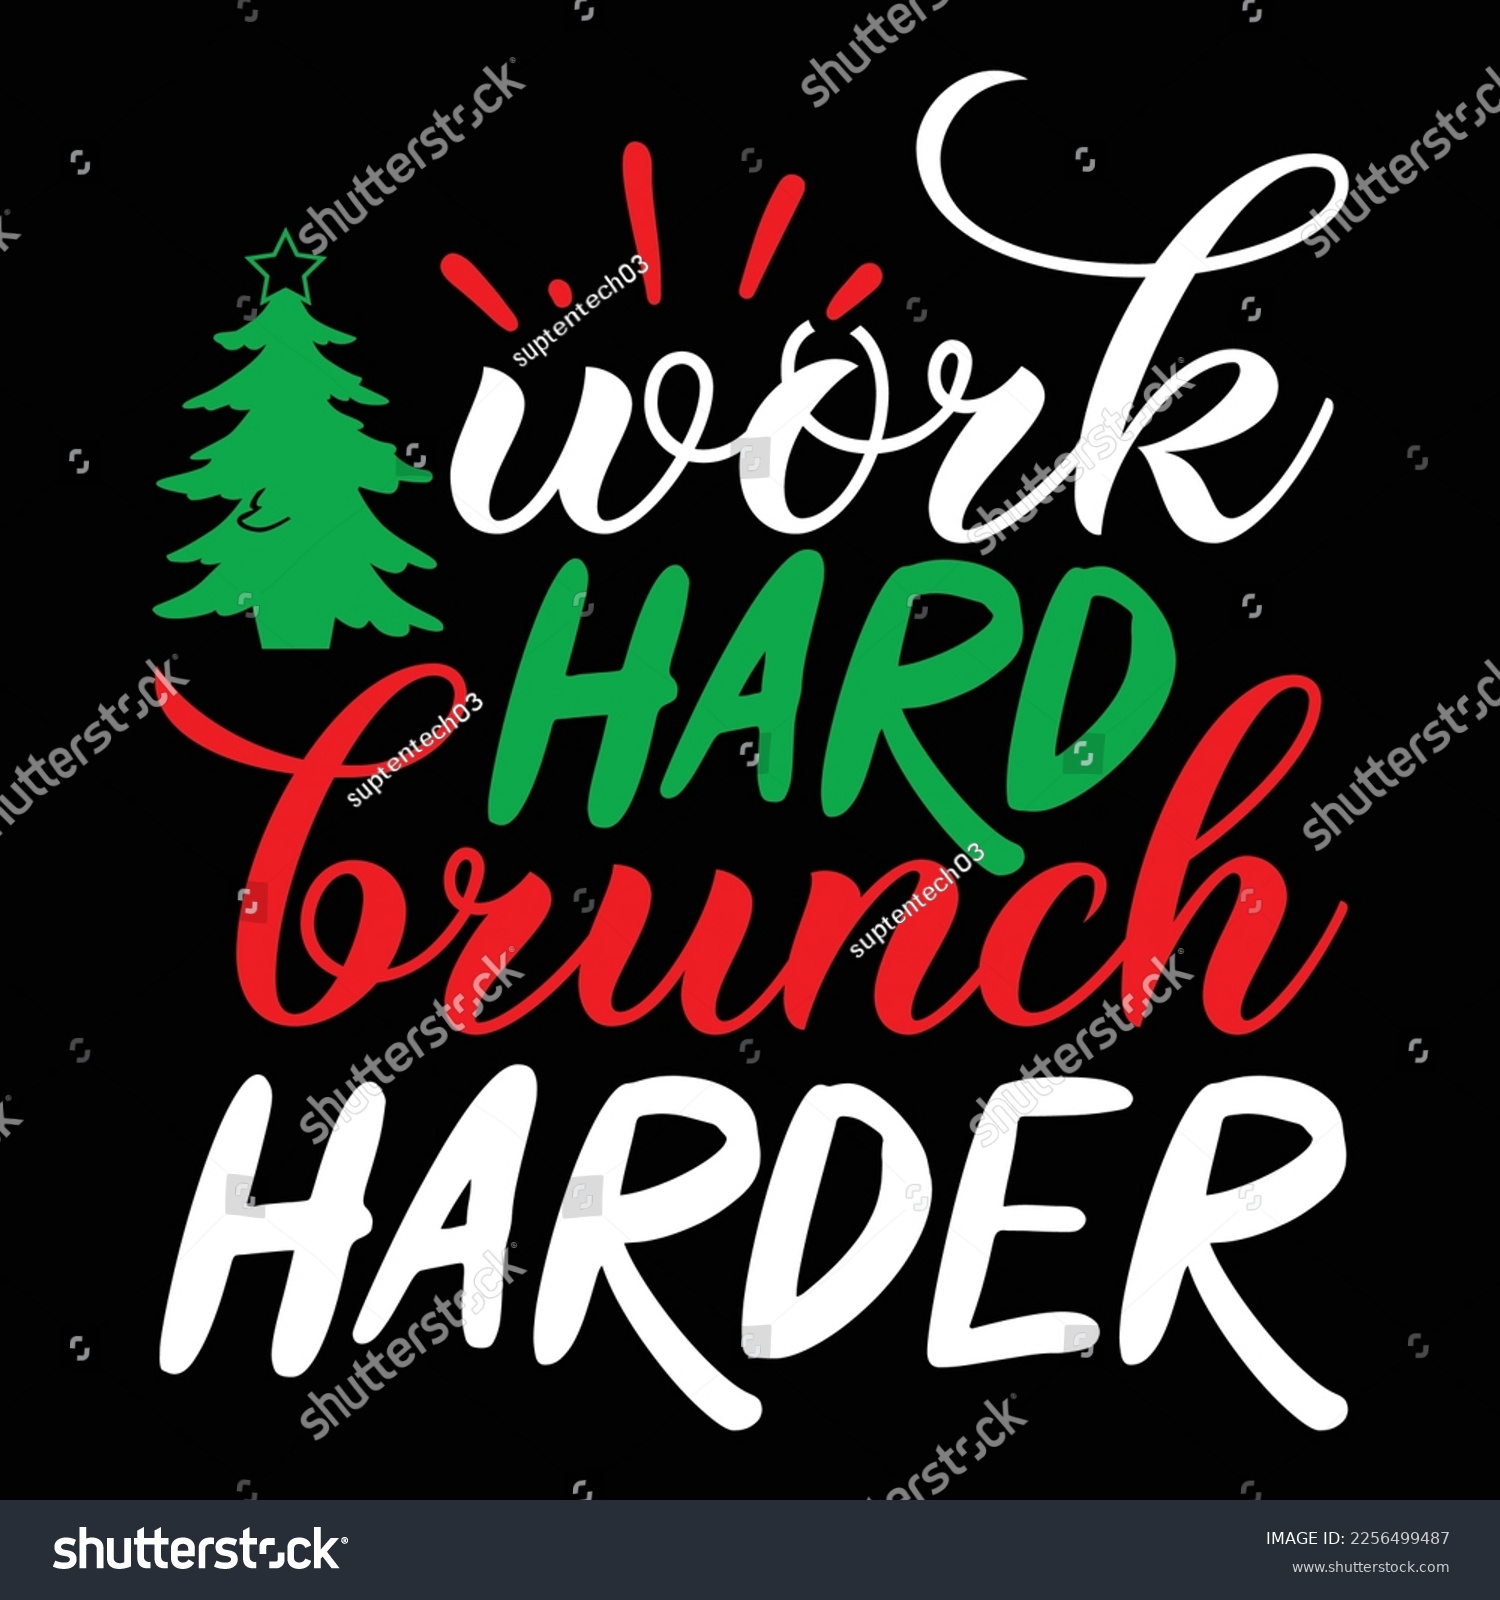 SVG of Work Hard Crunch Harder, Merry Christmas shirts Print Template, Xmas Ugly Snow Santa Clouse New Year Holiday Candy Santa Hat vector illustration for Christmas hand lettered svg